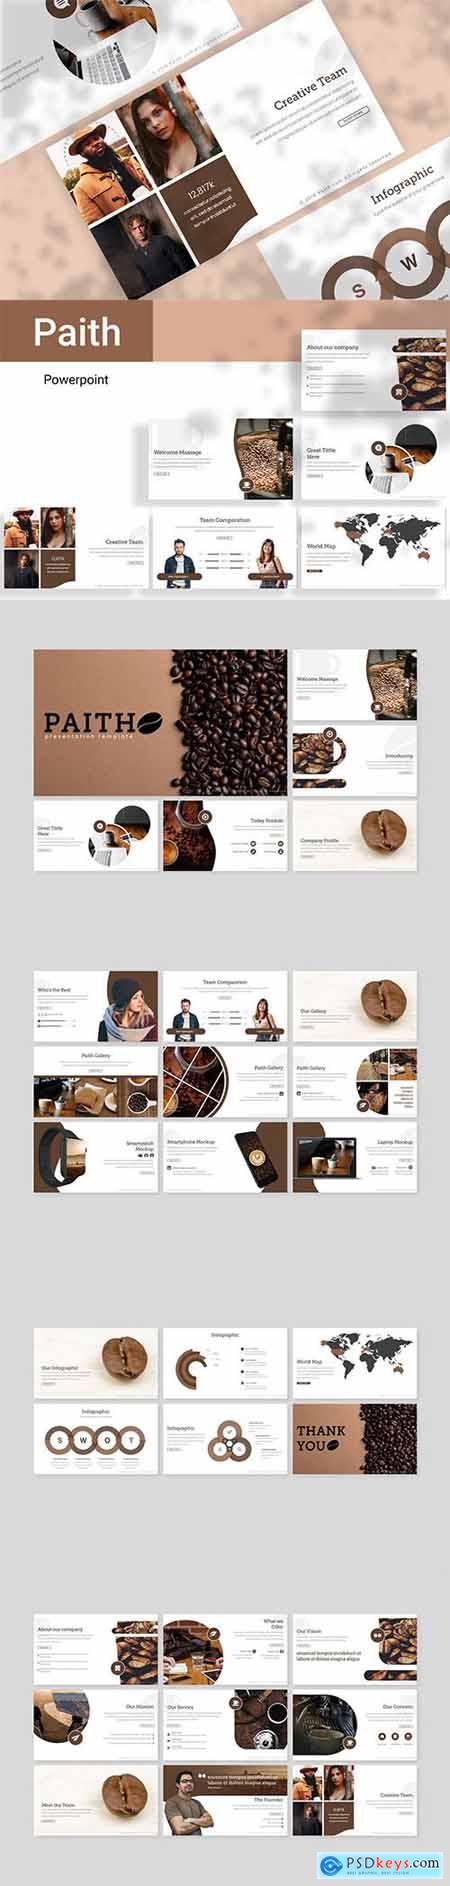 Paith Powerpoint, Keynote and Google Slides Templates